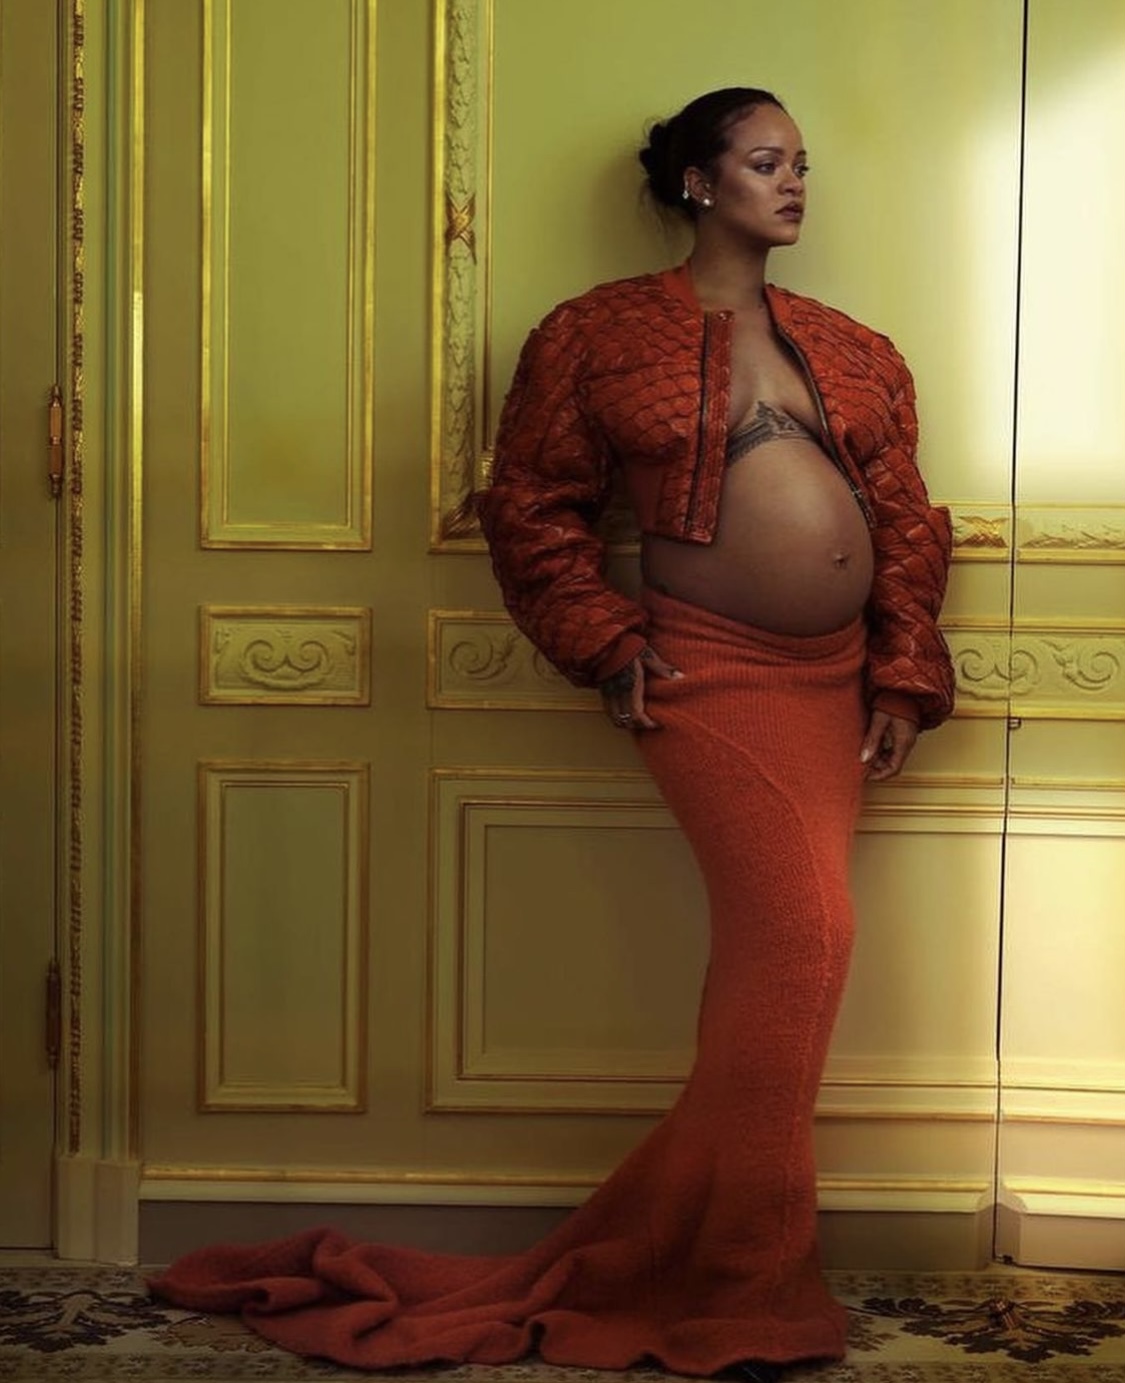 Pregnant Rihanna bares baby bump in new Louis Vuitton ad campaign